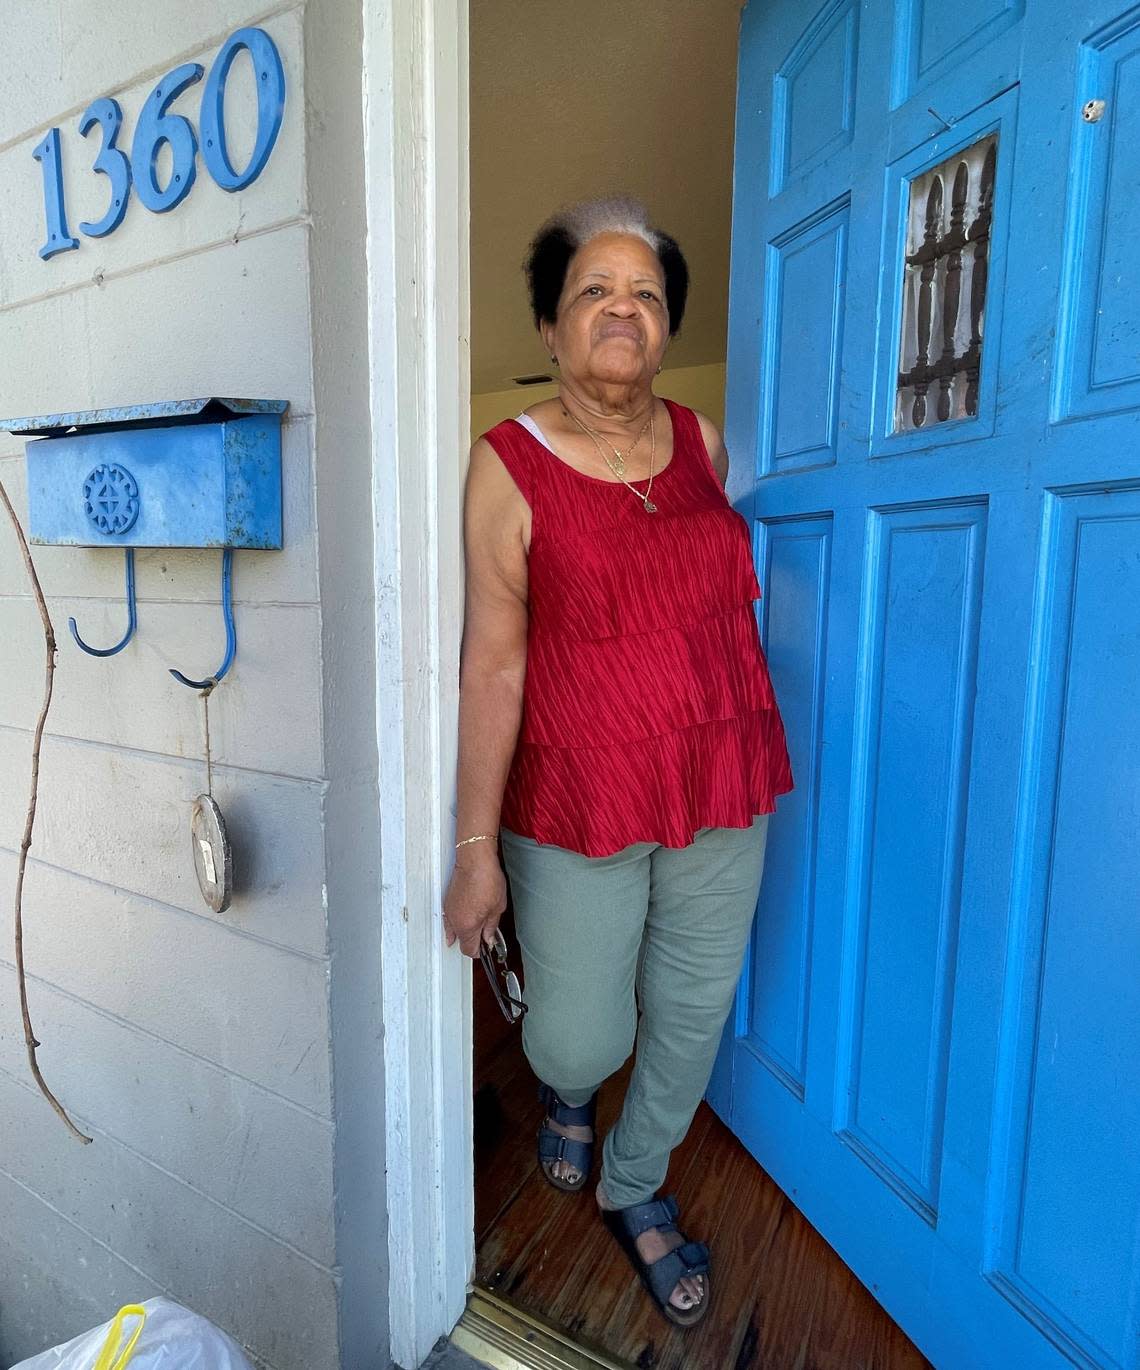 Barbara Fuller, a River Park resident, stands in the doorway of her home after Hurricane Ian on Saturday, Oct. 1, 2022. Her home flooded during a storm surge caused by Hurricane Ian on Wednesday, Sept. 28.